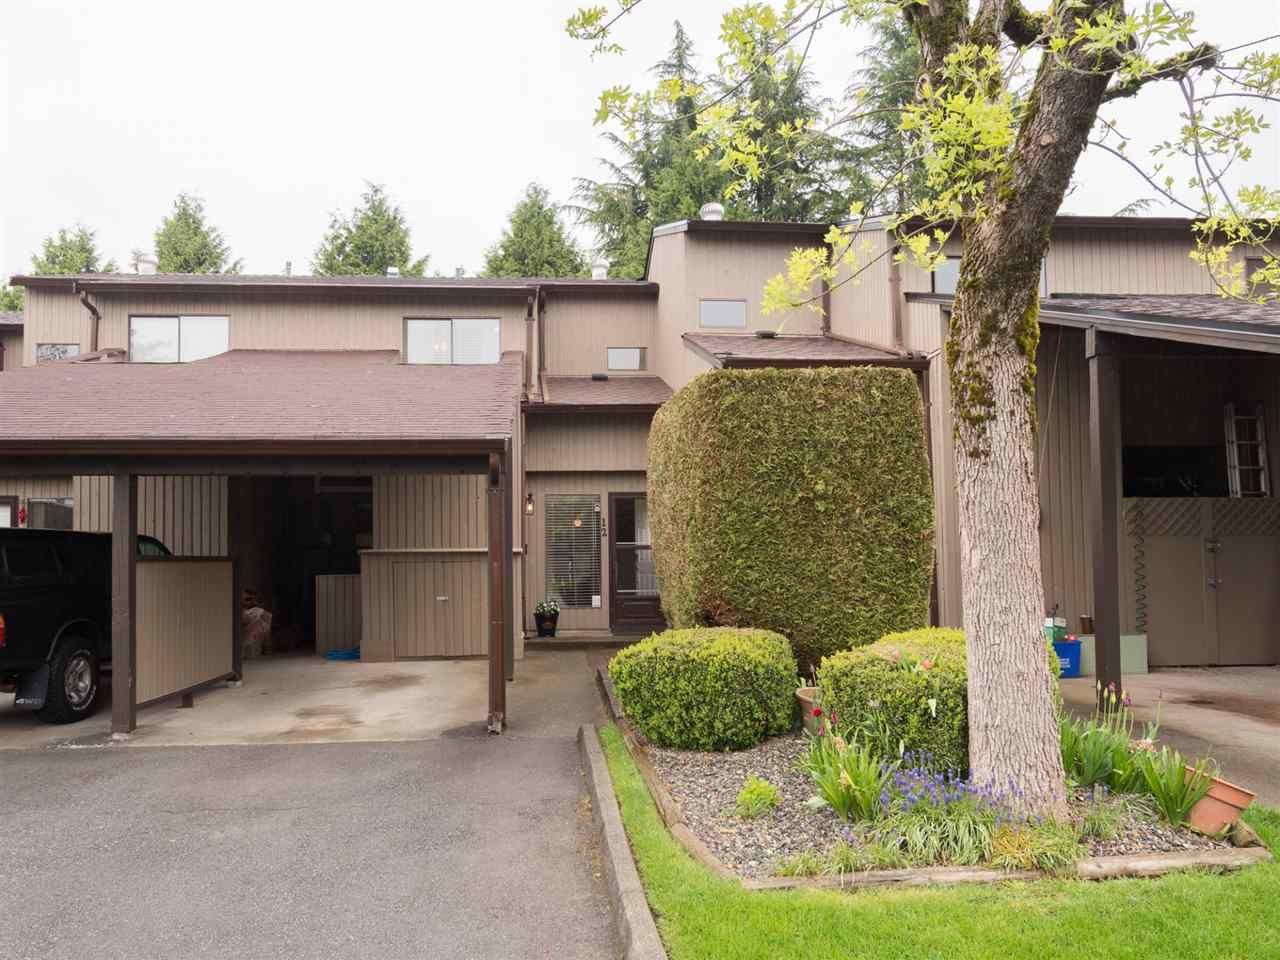 Main Photo: 12 27044 32 AVENUE in : Aldergrove Langley Townhouse for sale : MLS®# R2296126